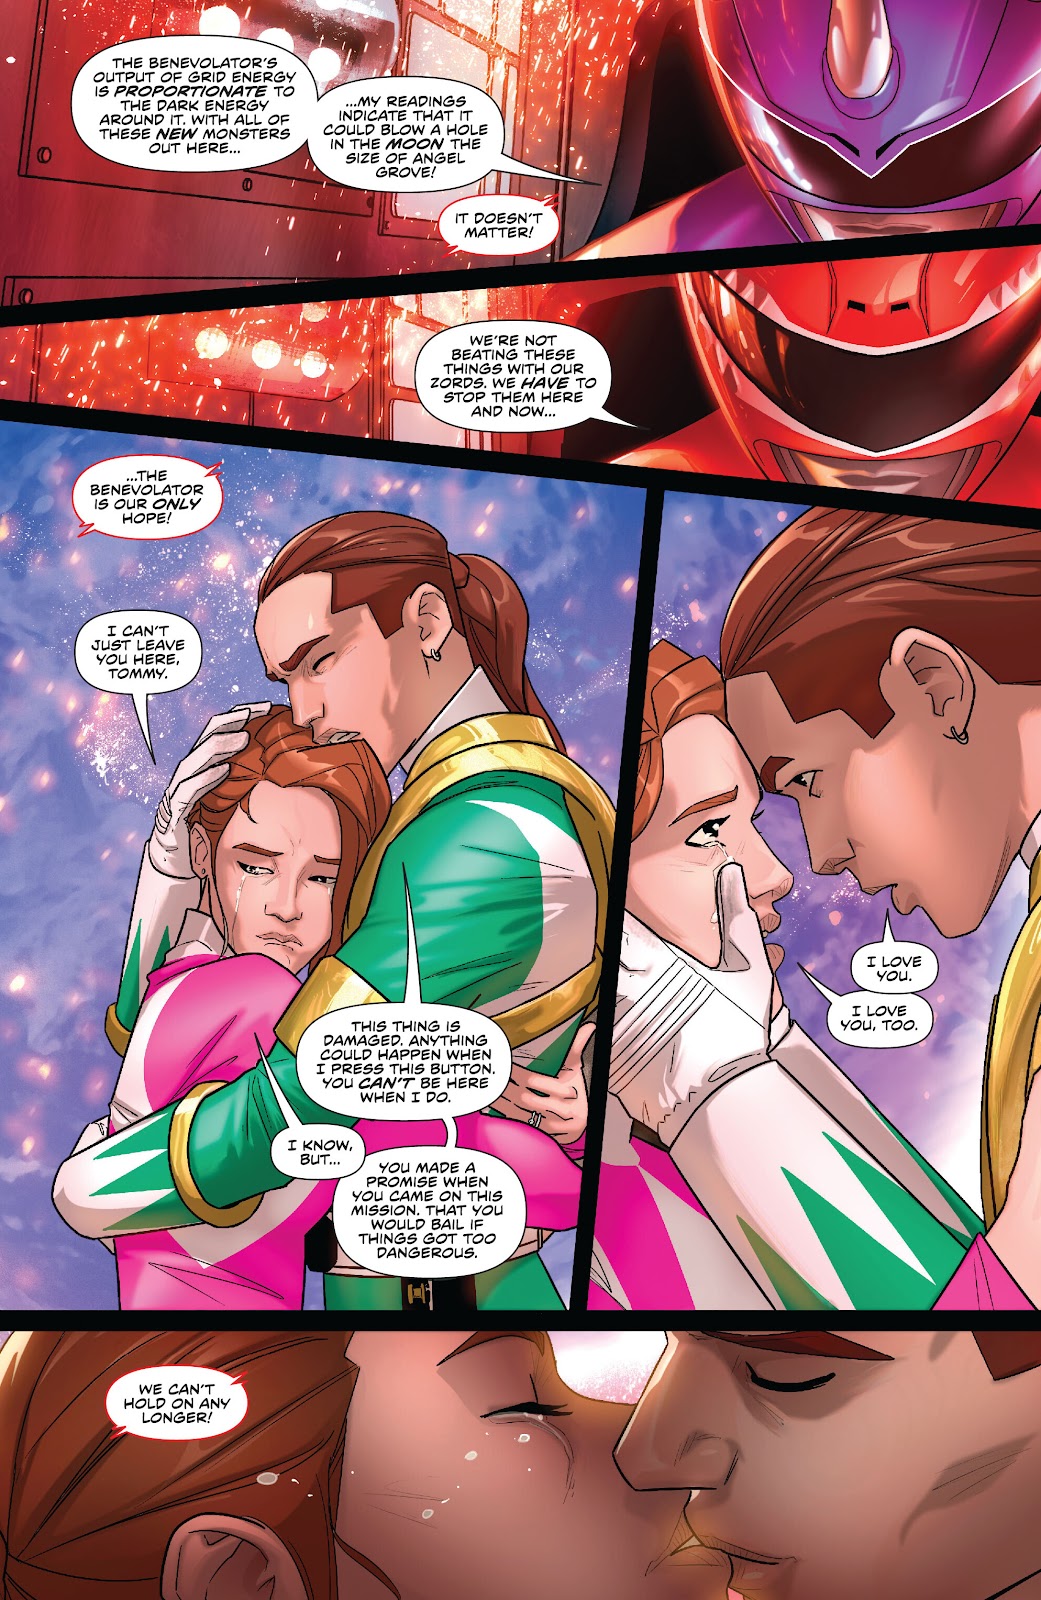 Mighty Morphin Power Rangers: The Return issue 2 - Page 12